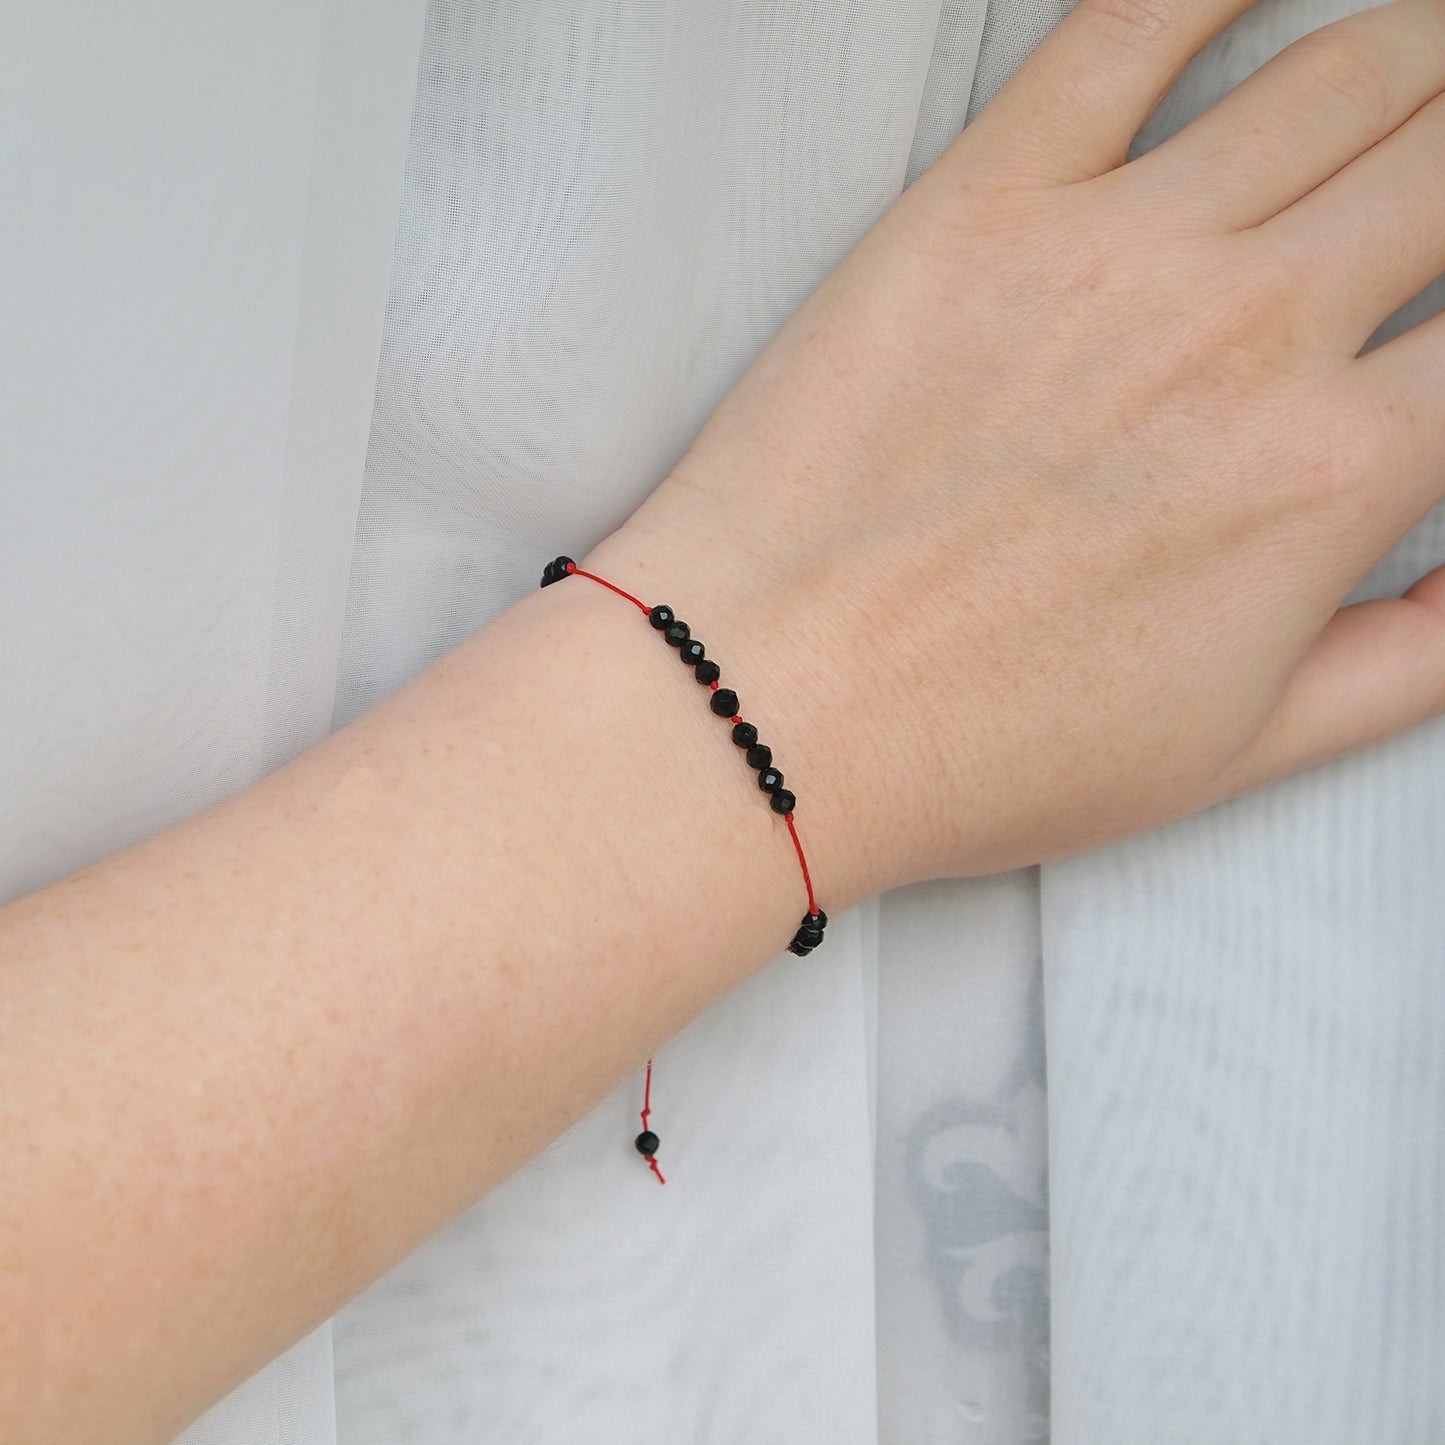 minimal protection bracelet with black tourmaline on red string